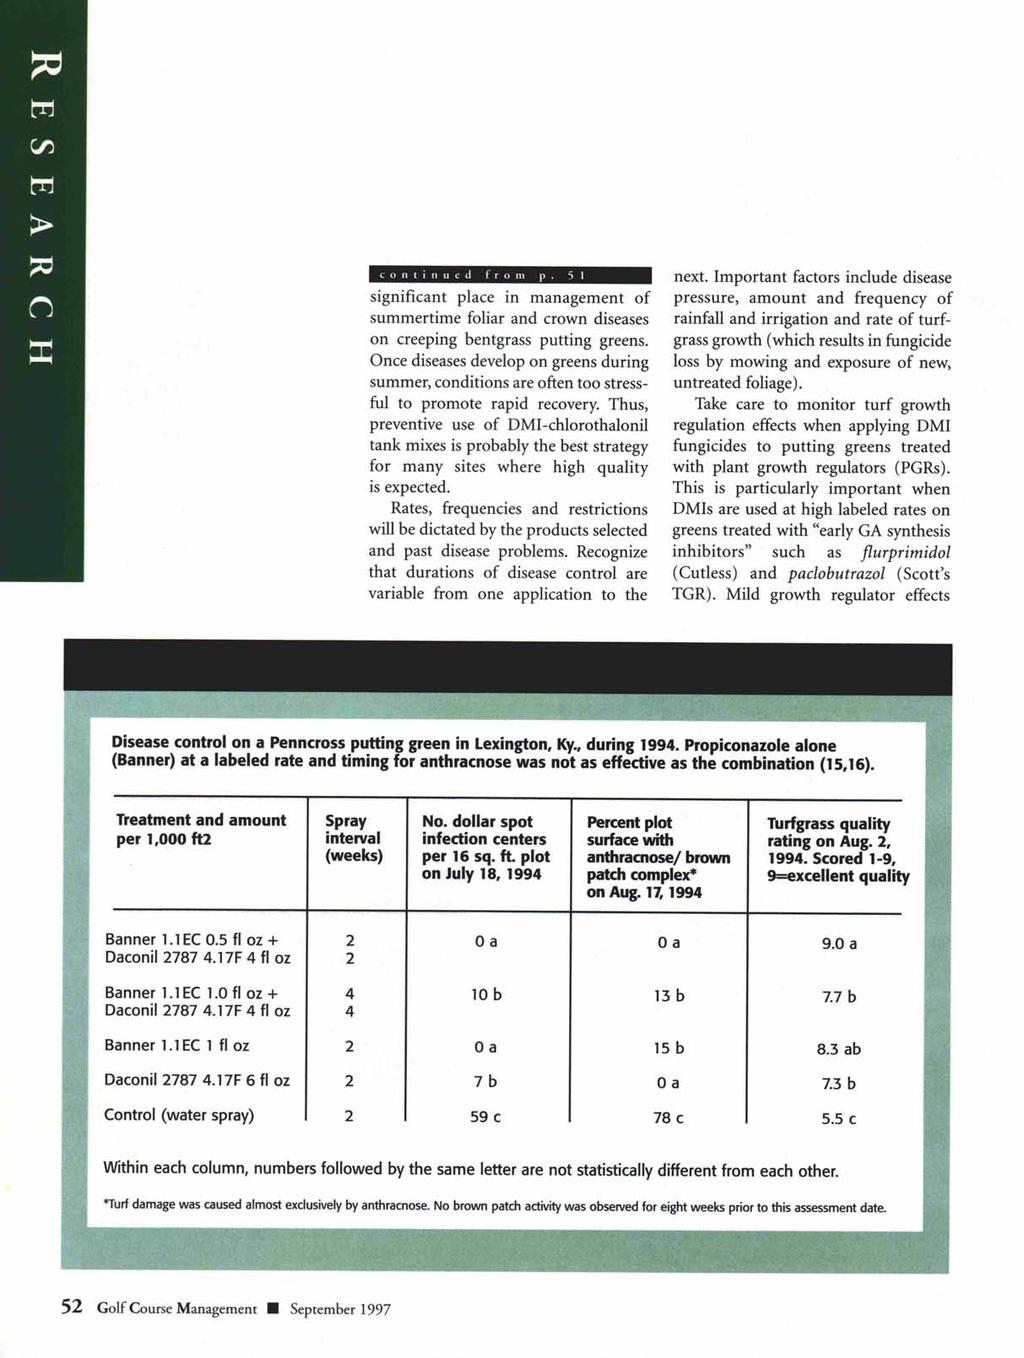 continued from p. 51 significant place in management of summertime foliar and crown diseases on creeping bentgrass putting greens.